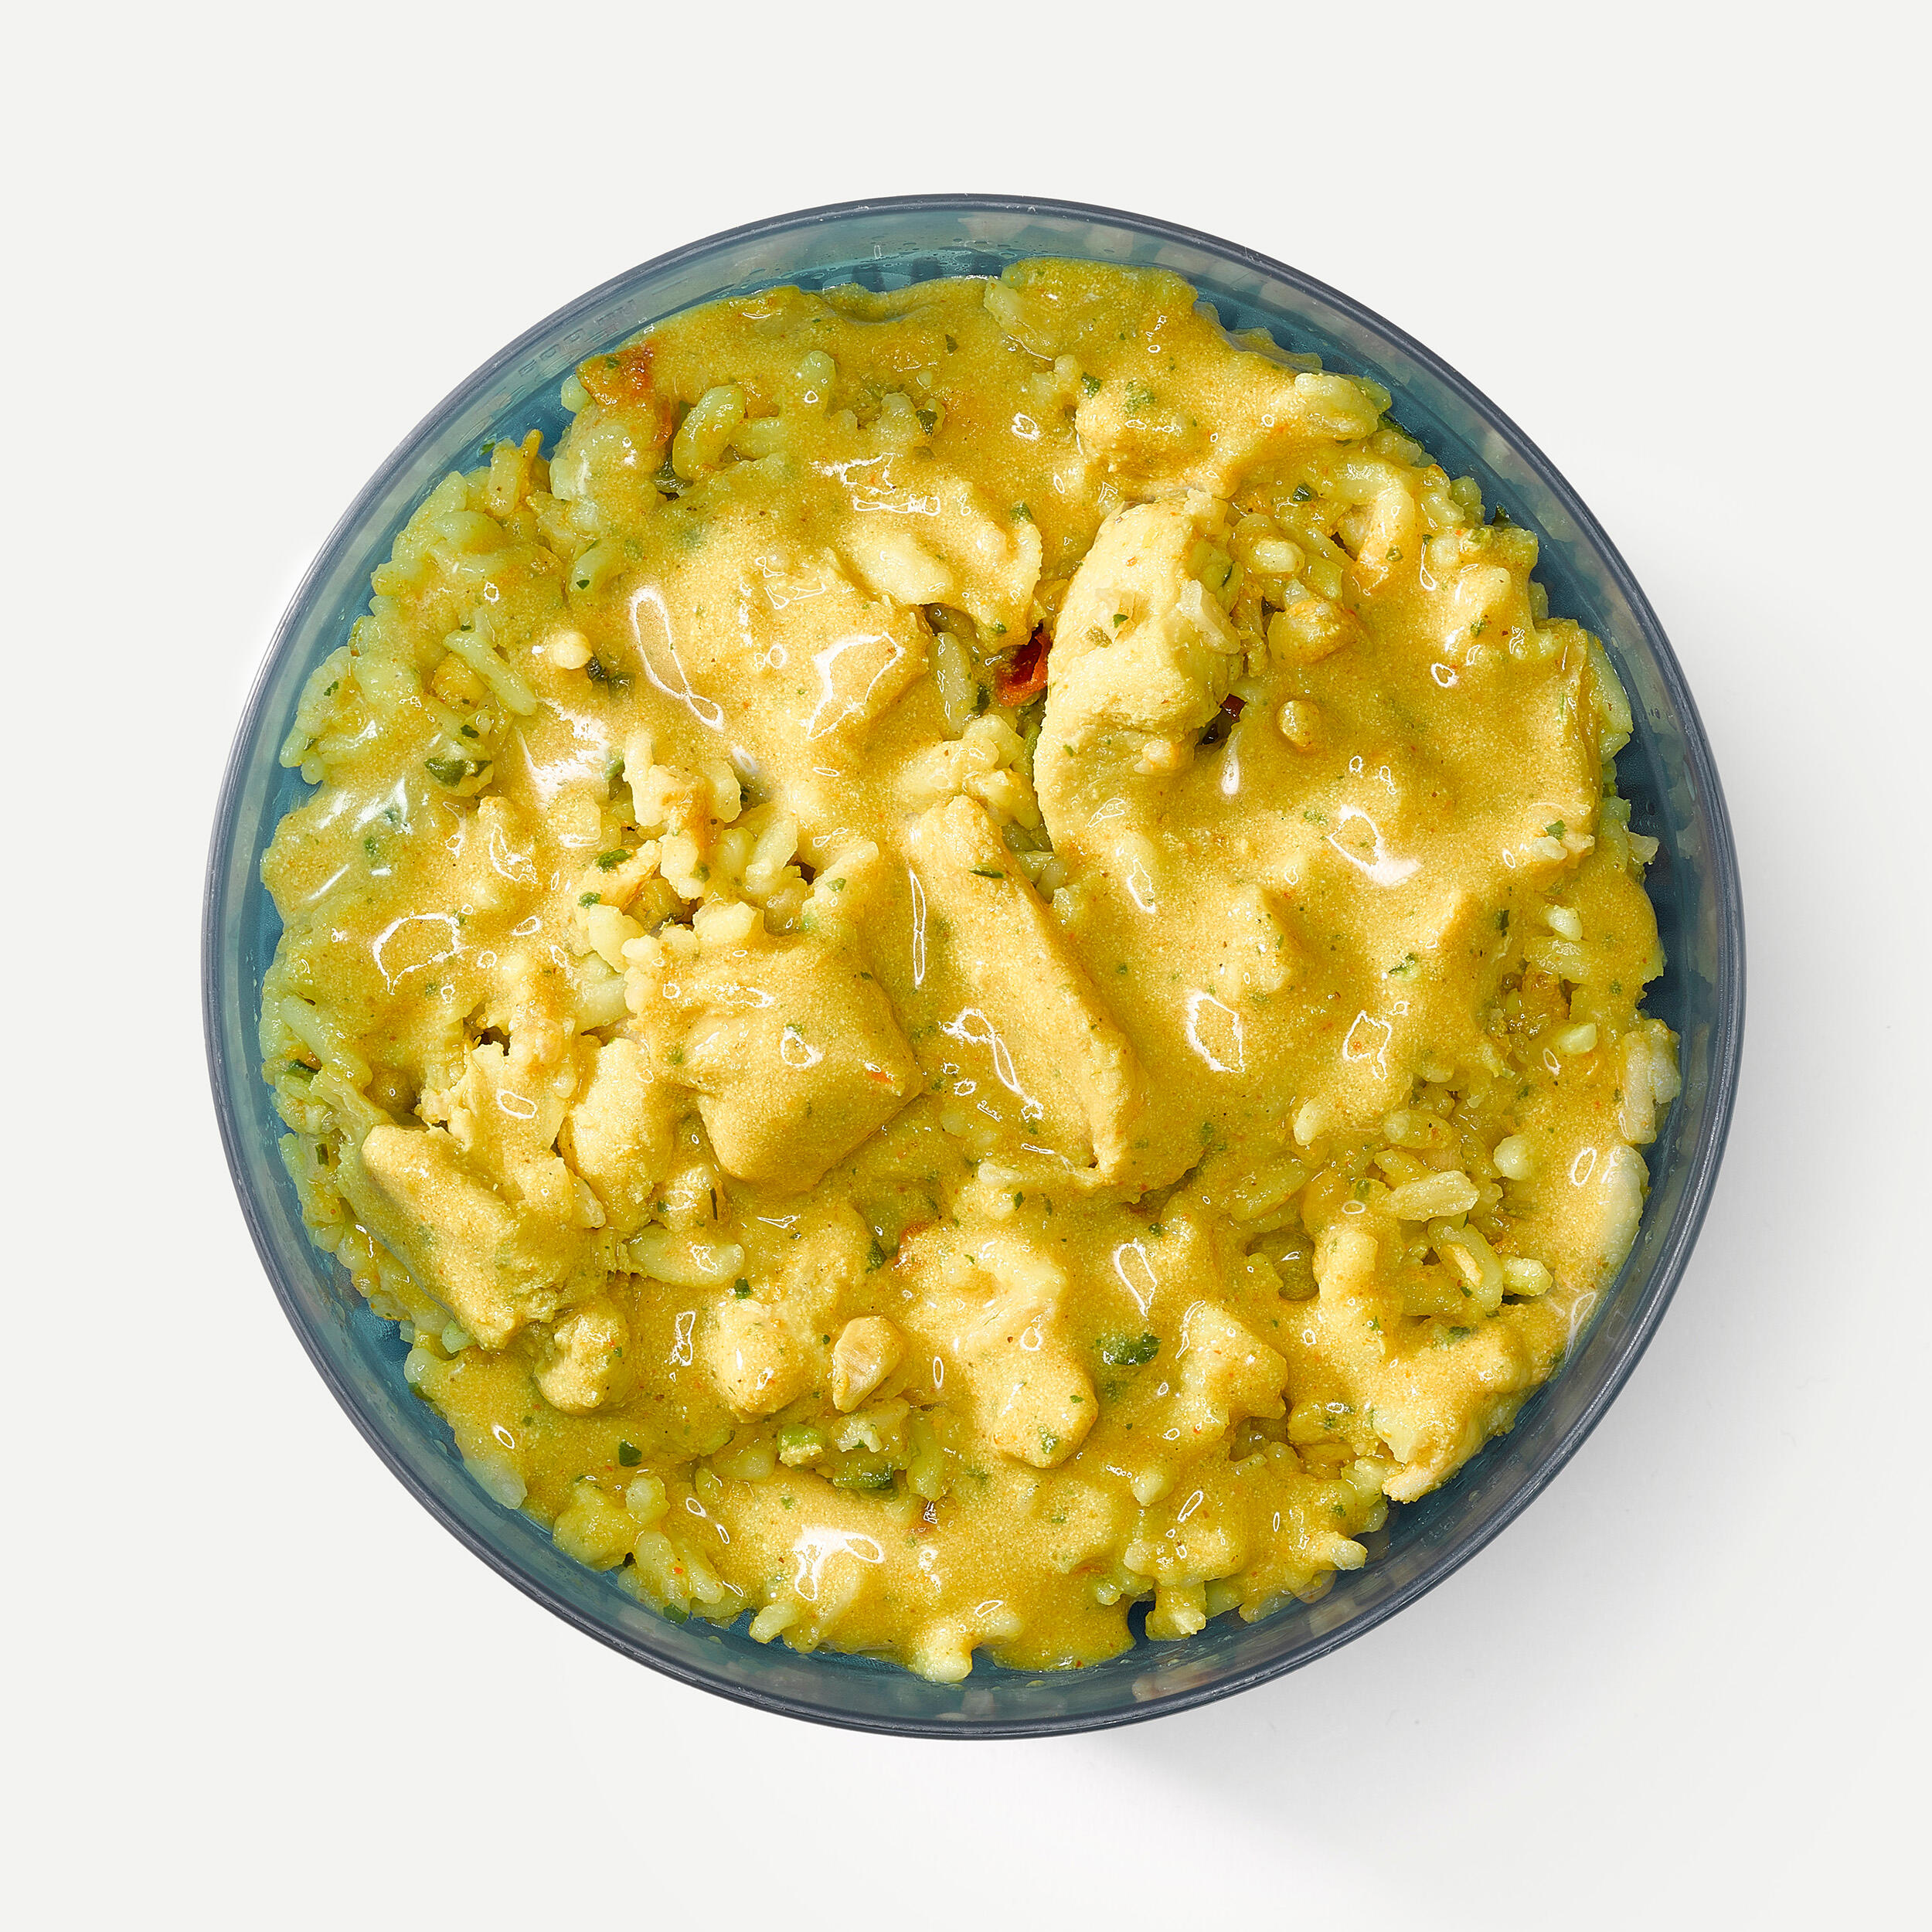 Gluten-free dehydrated meal - Curry chicken rice - 120g 2/3